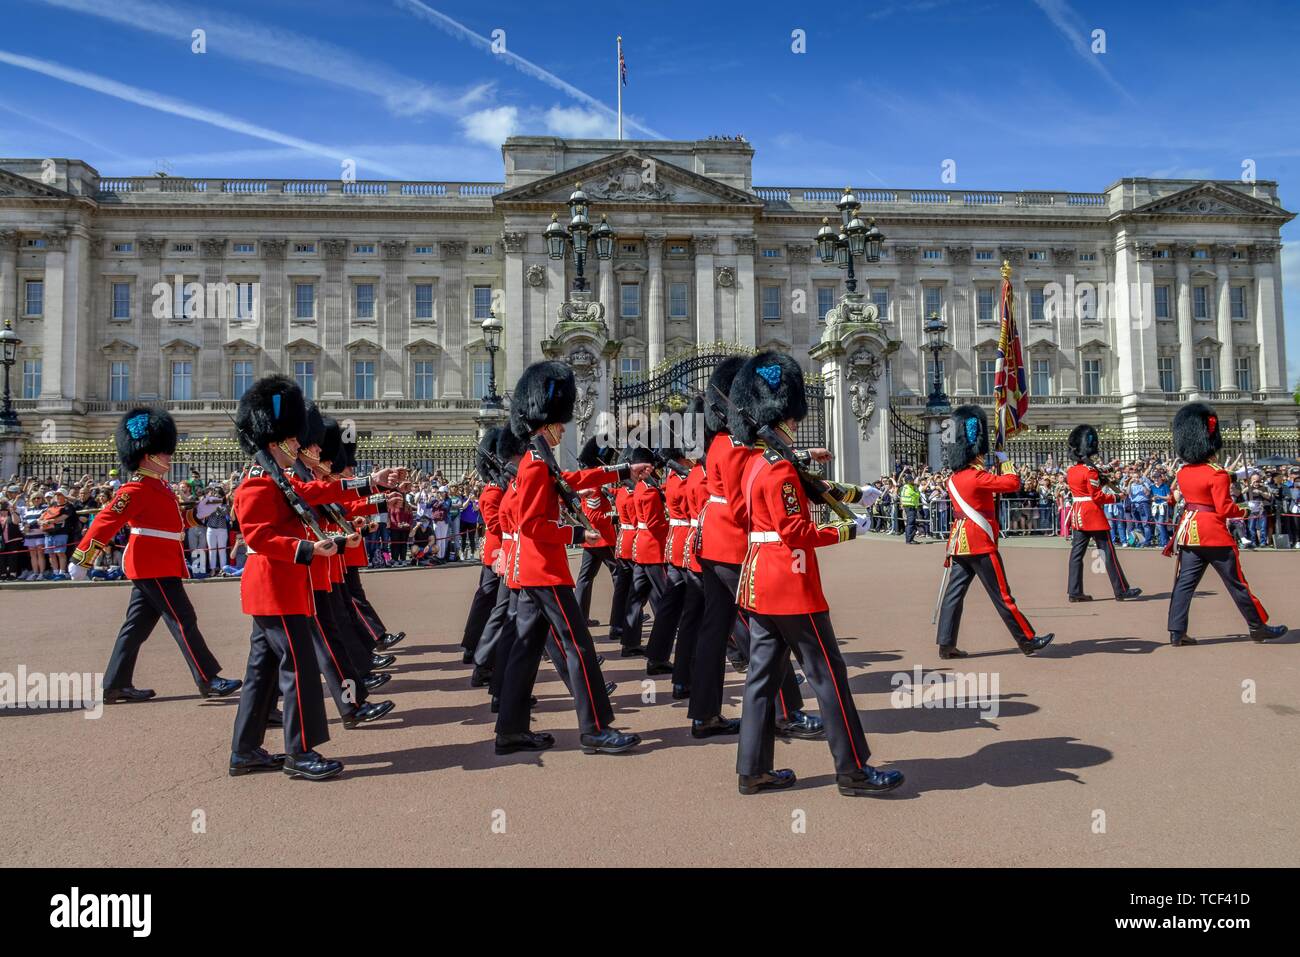 Guards Queen's Guards, Changing of the guards, Buckingham Palace, London, England, Great Britain Stock Photo